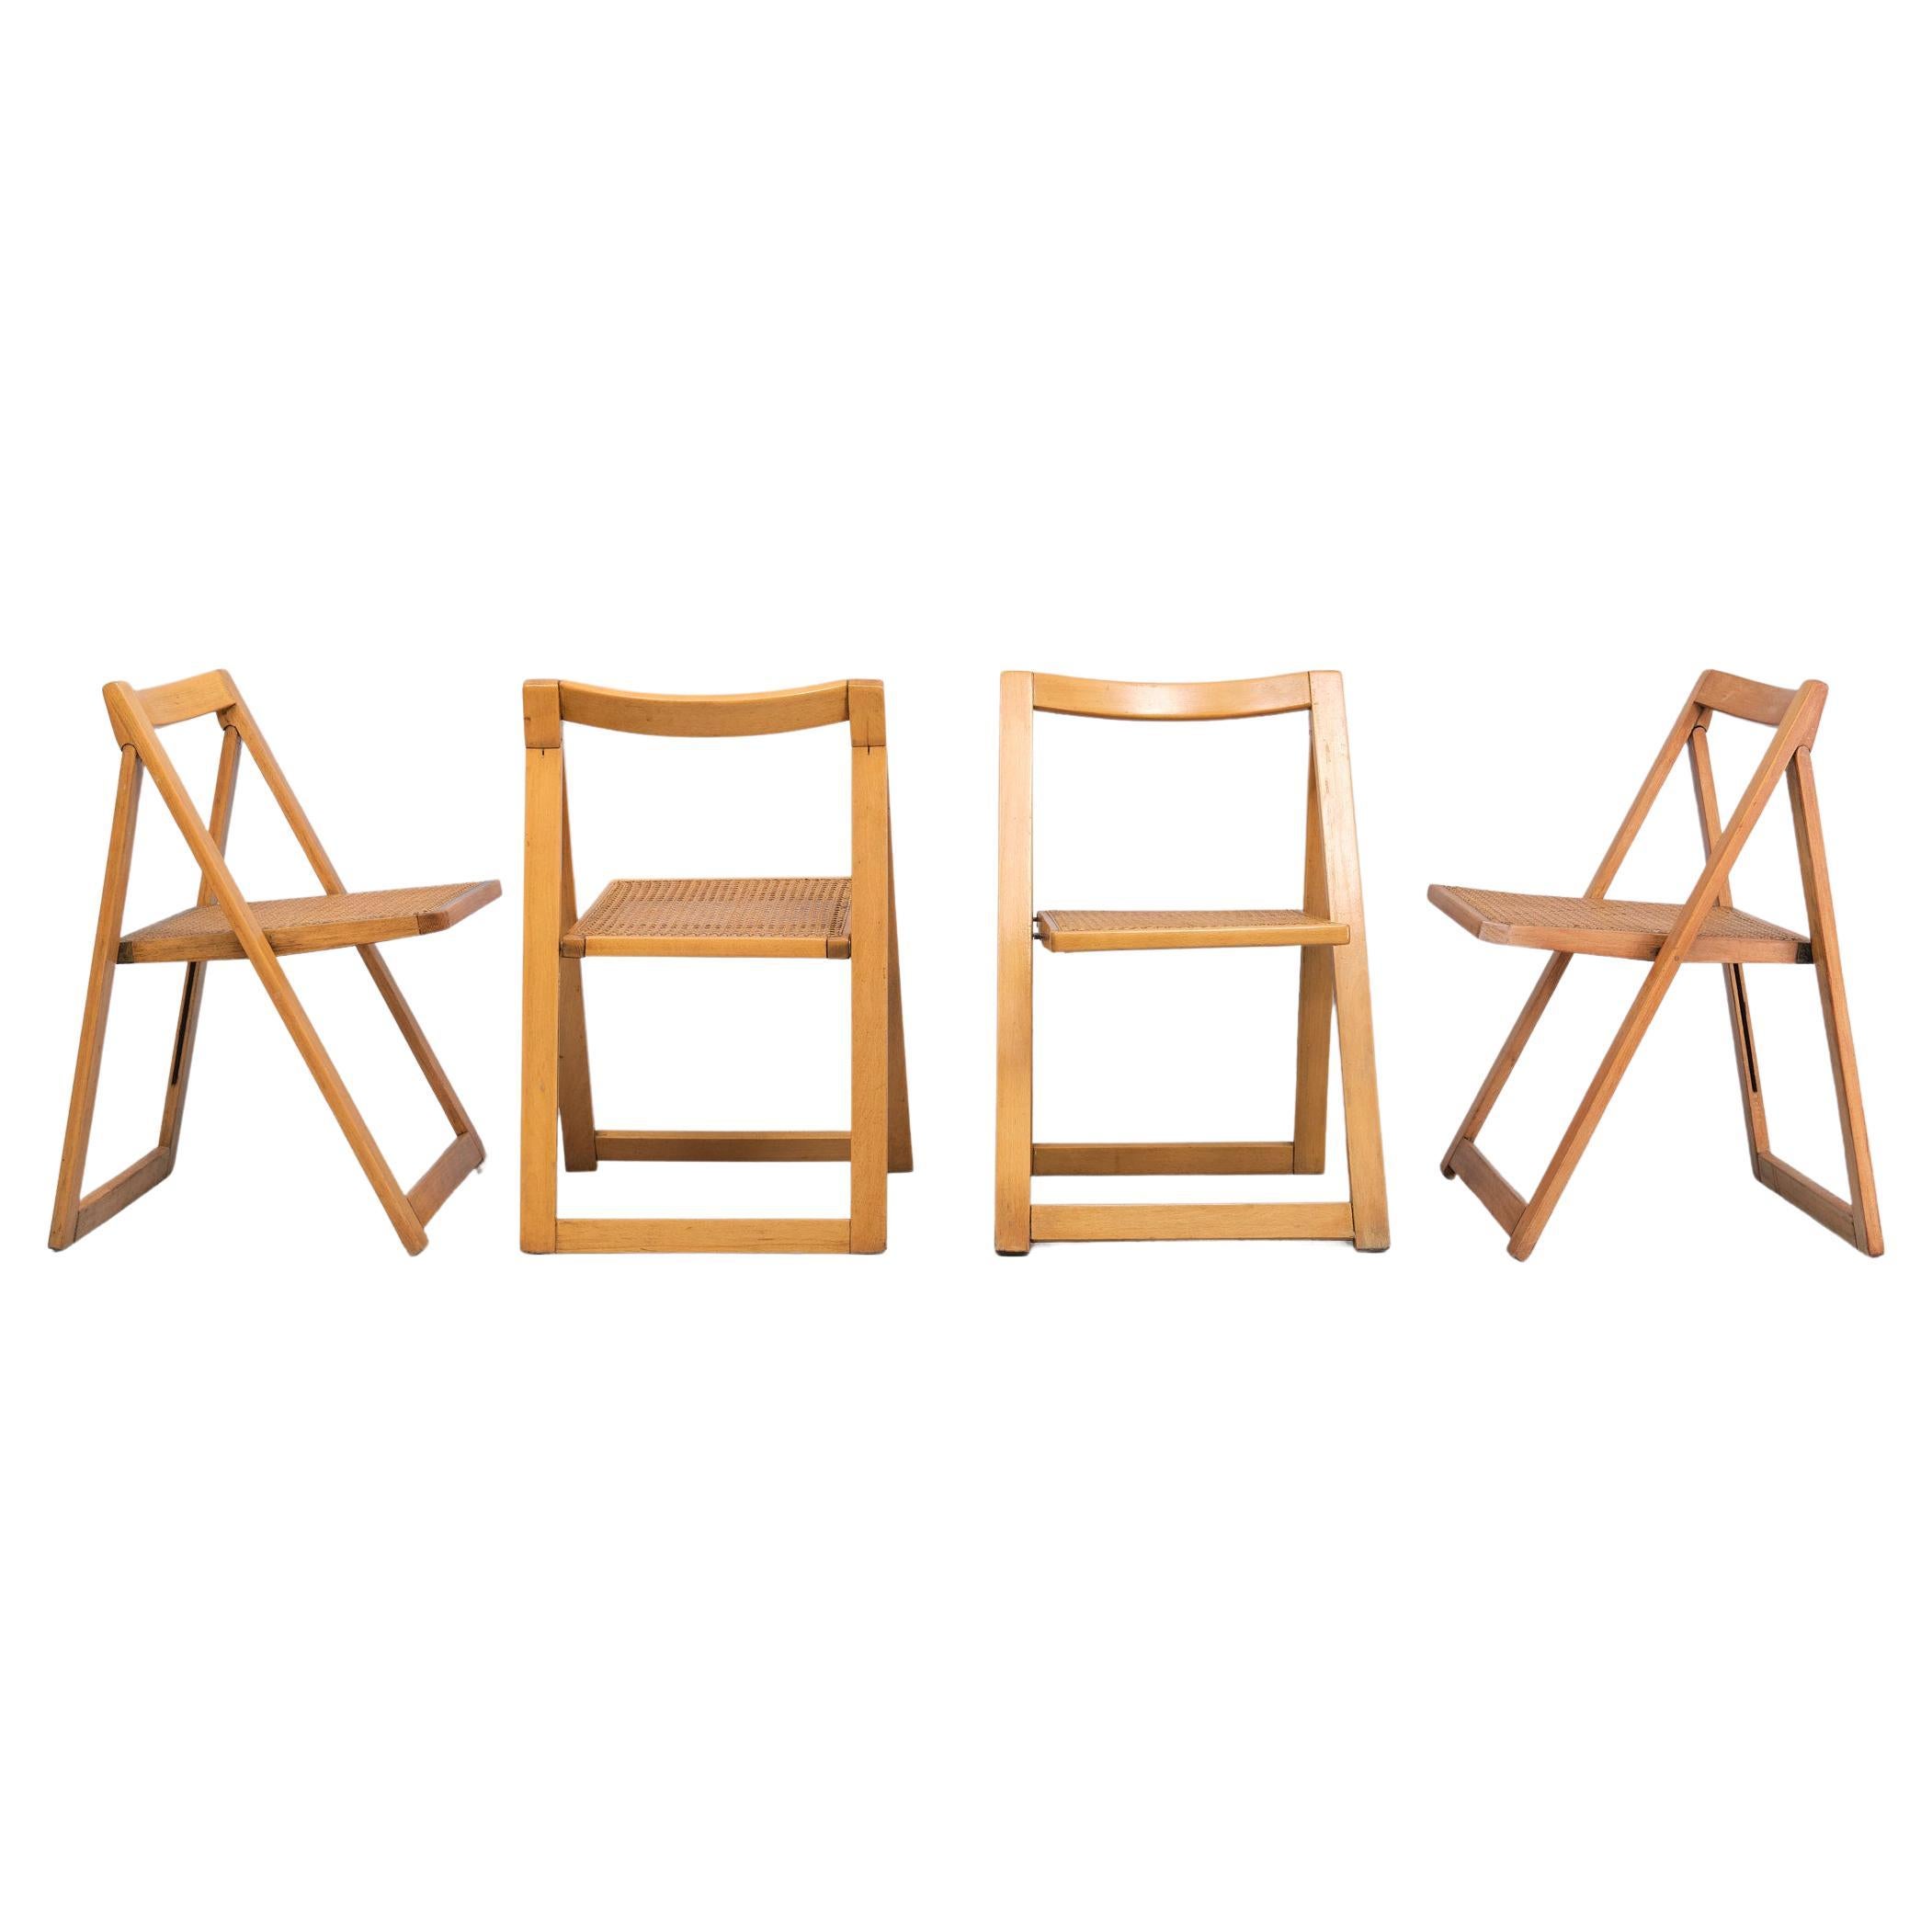 Very nice set of Beech wood folding chairs ,comes width Wicker seats .    
set of four  of Vintage Mid-Century ZMG Radomsko 
The chairs made by Polish furniture maker Radomsko ZMG, famed for also making Thonet chairs (same factory) are in a good